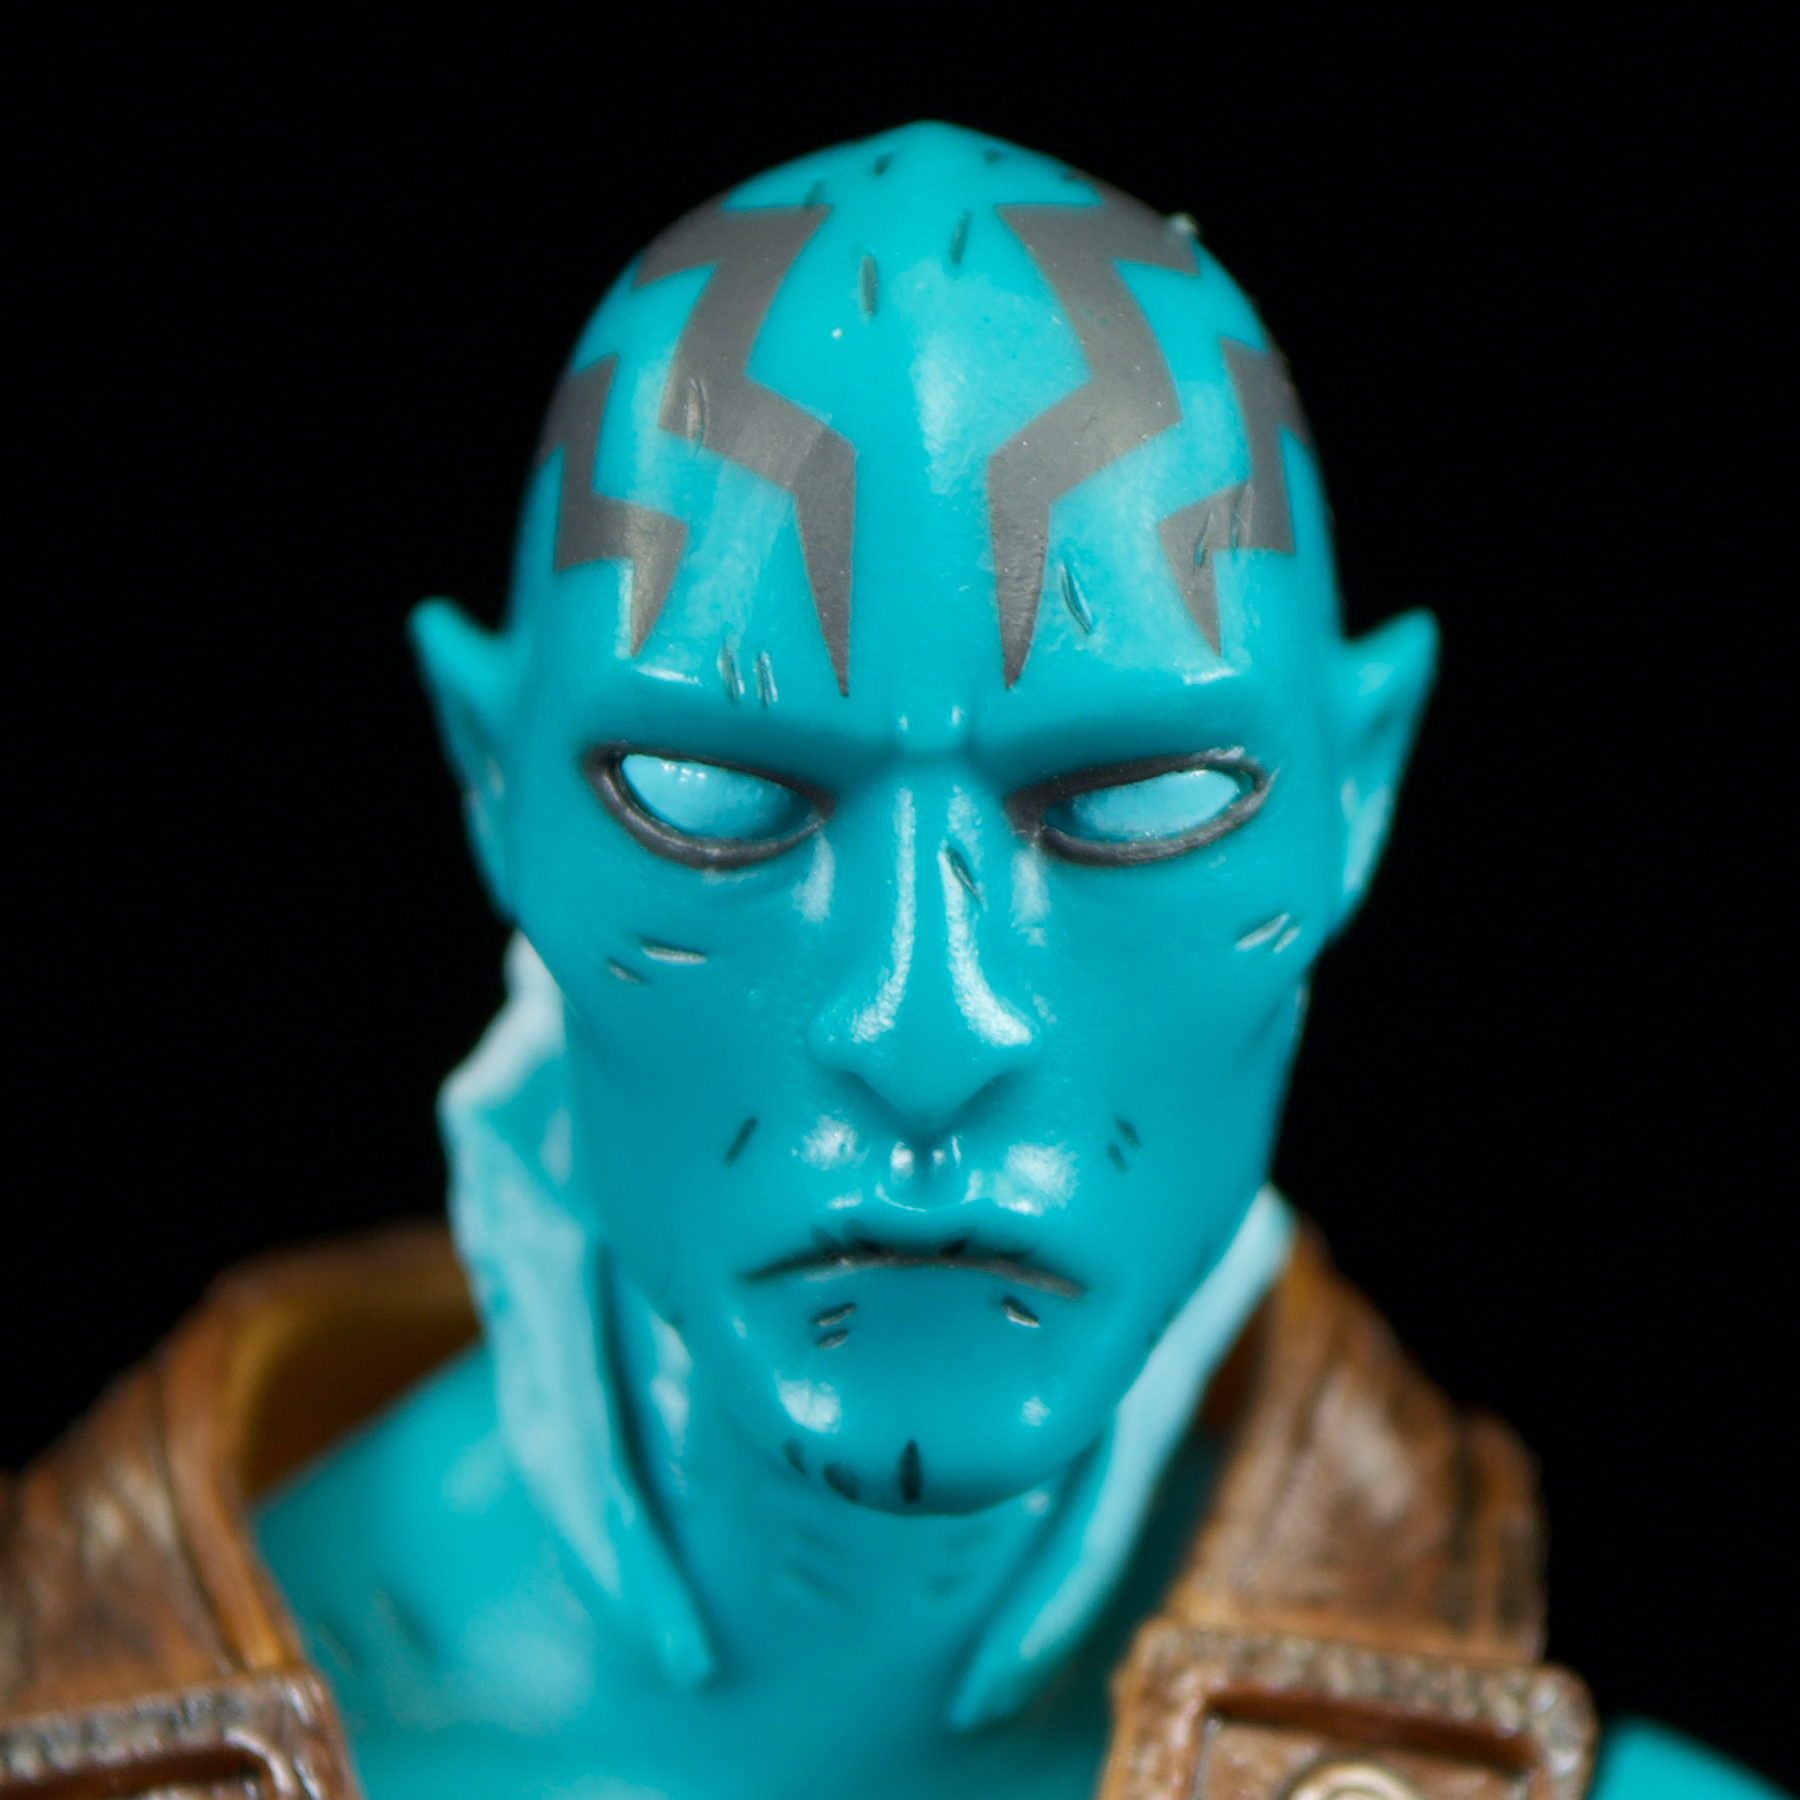 Details about   1/12th Hellboy Abraham Sapin Head Sculpture Model for 6" Action Figure Doll Toys 